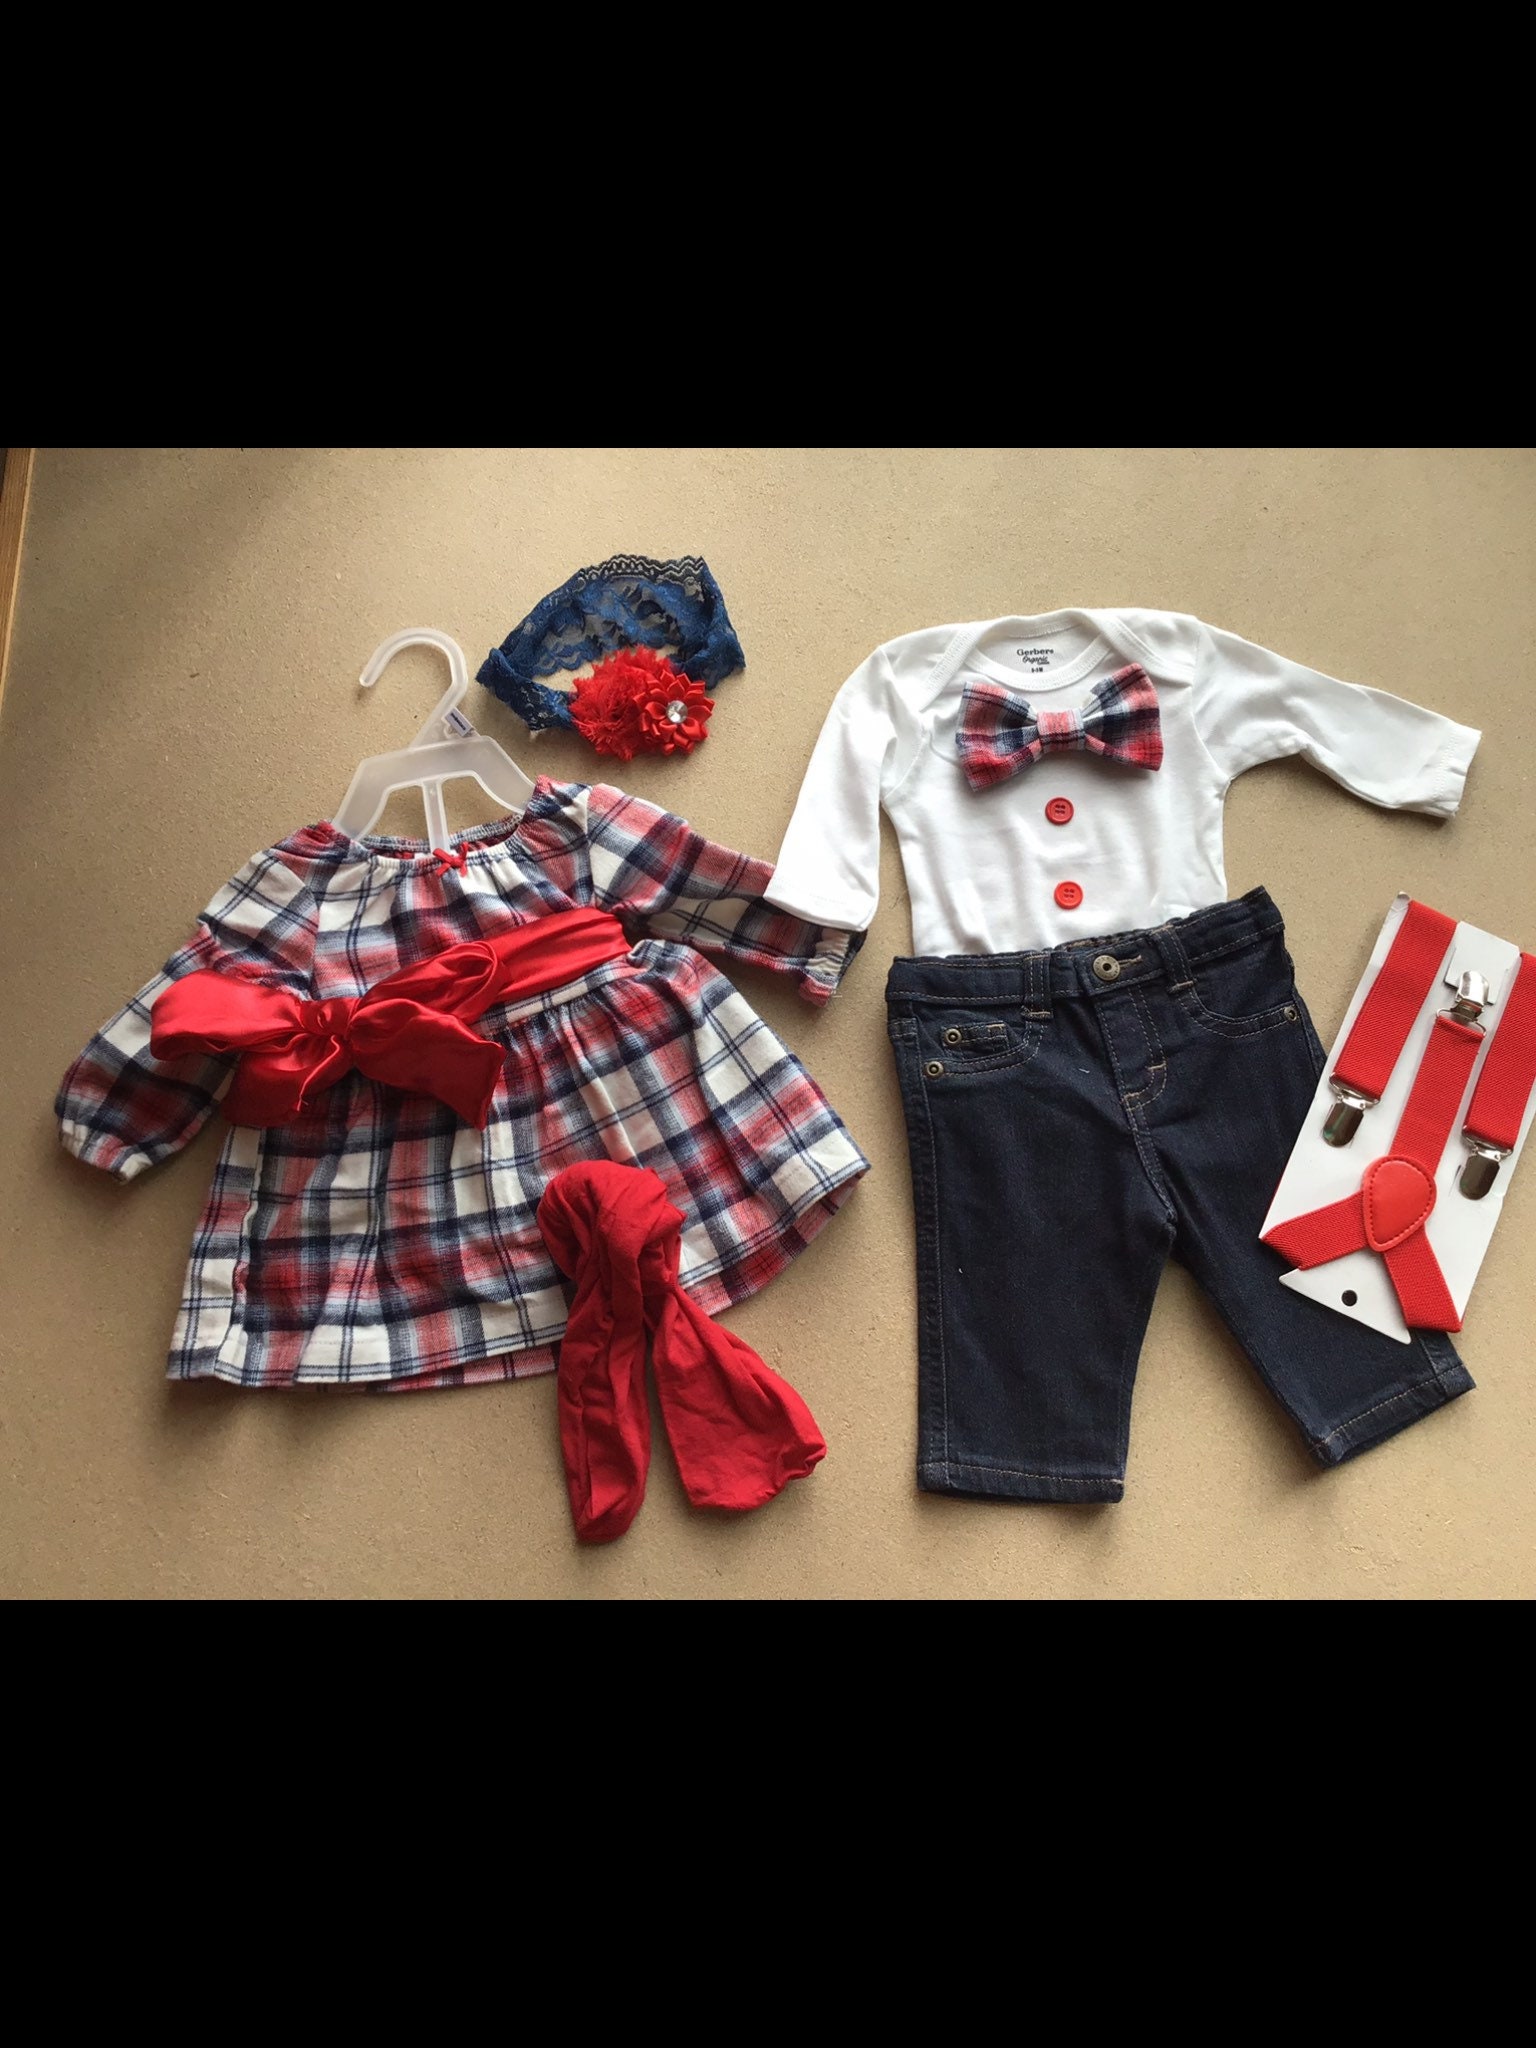 All Sizes Mix and Match Newborn  TWINS Brother and Sister matching Baby Outfits Twin Clothes for Boy and Girl Take me Home Outfit 7 PIECES. Kleding Meisjeskleding Babykleding voor meisjes Kledingsets 